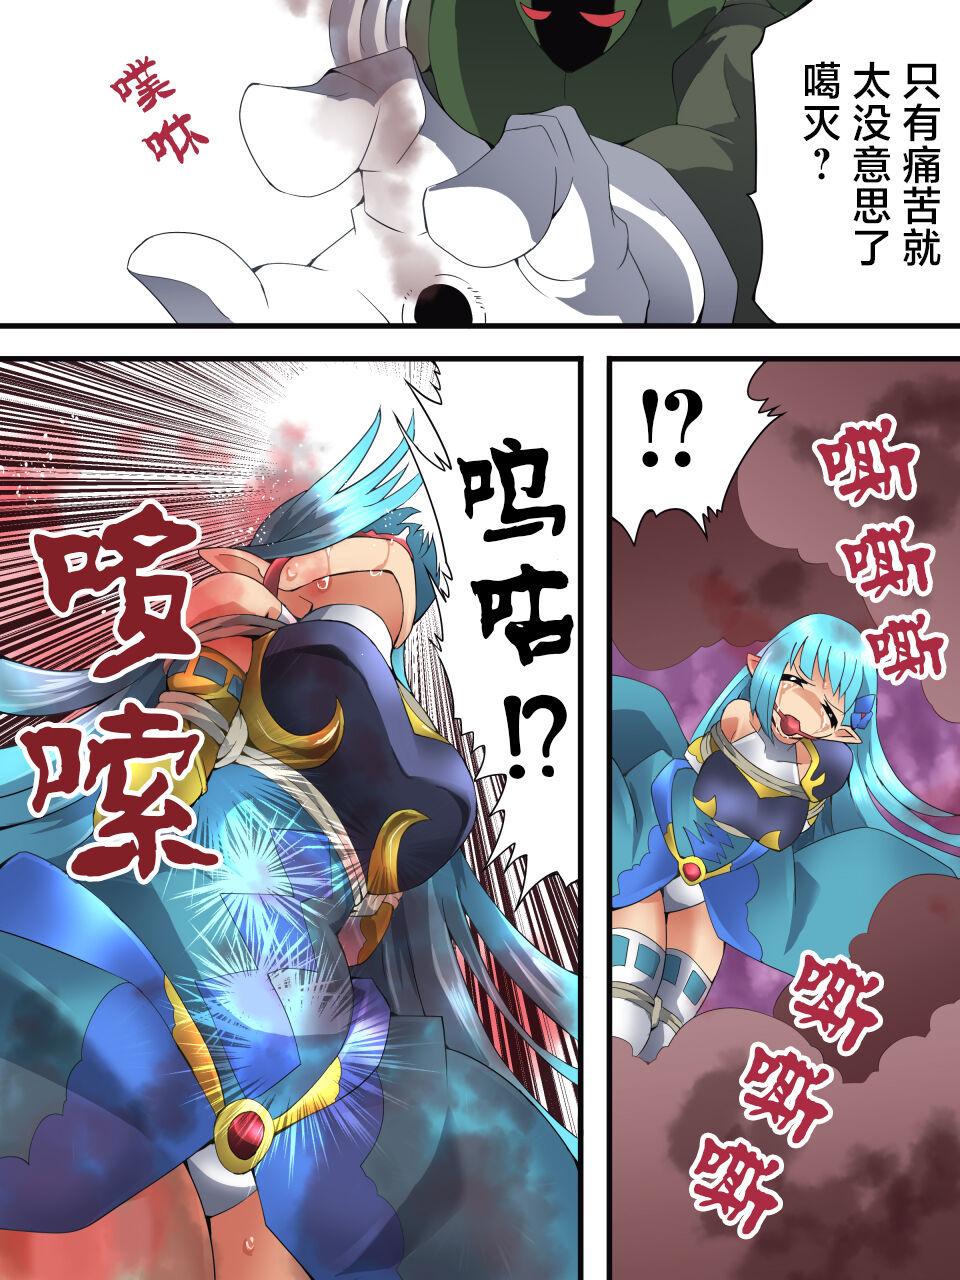 Fairy Knight Fairy Bloom Ep3 Chinese Ver. 13